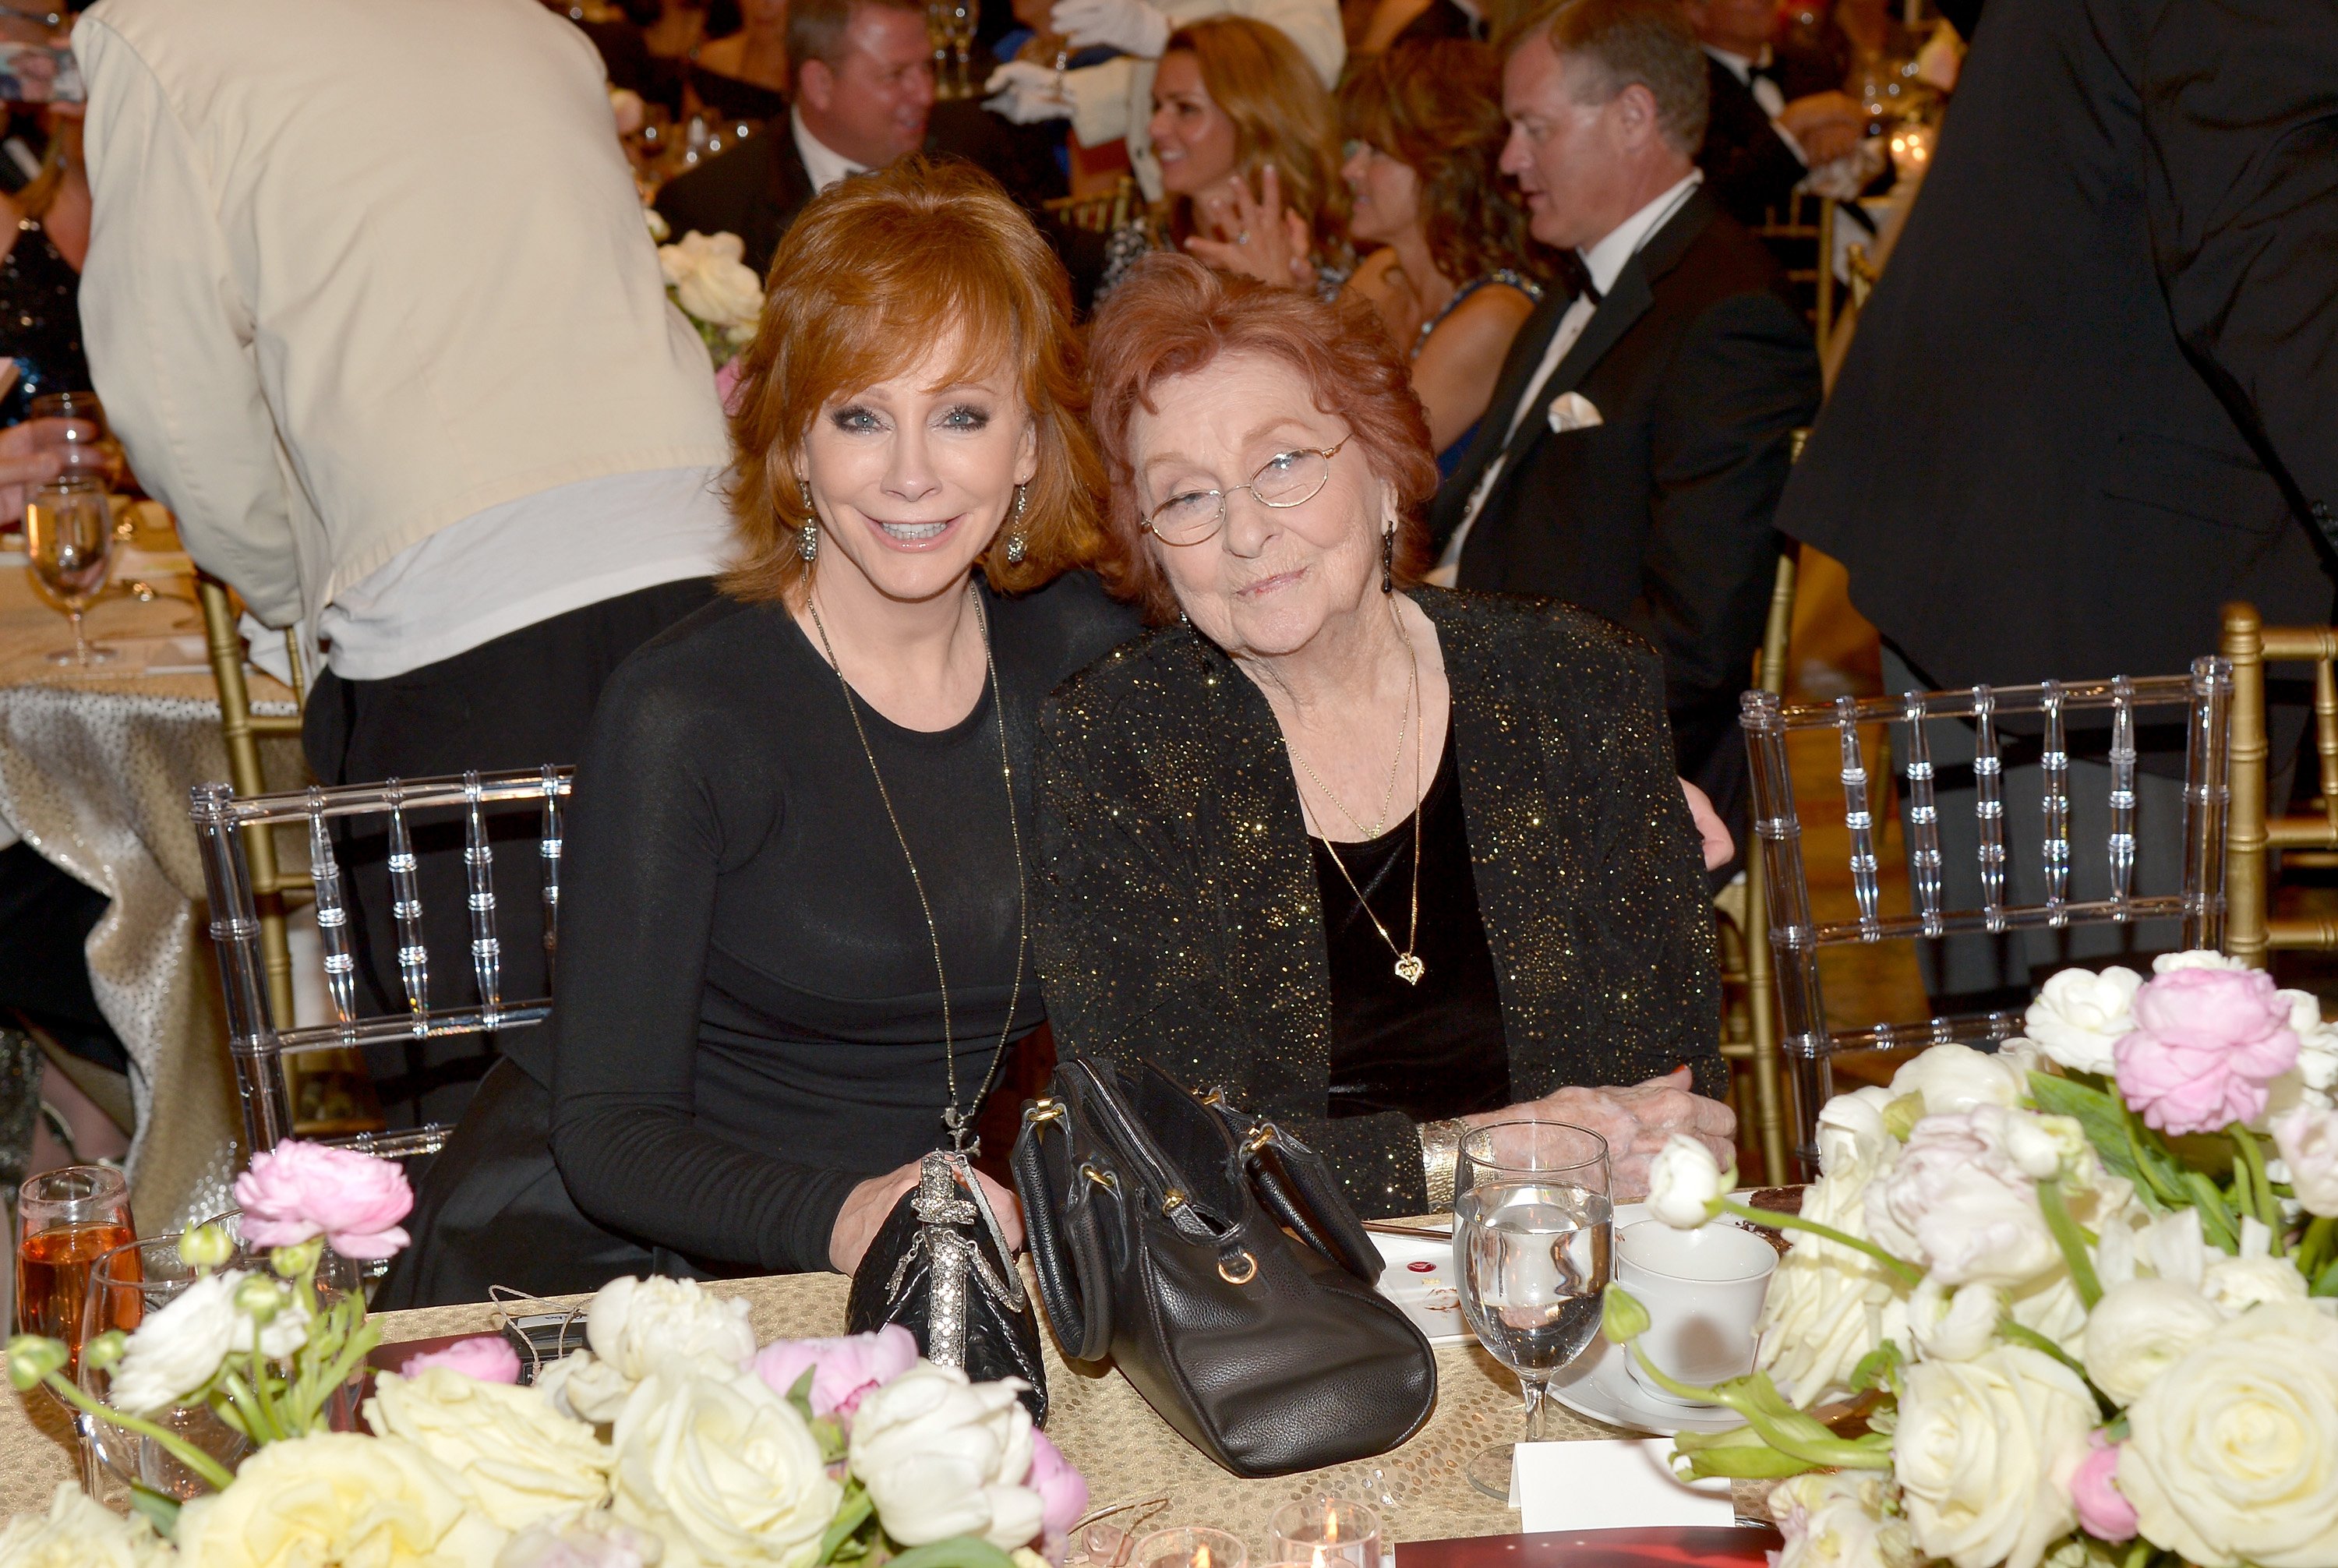 Singer Reba McEntire and her mother Jacqueline Smith at Muhammad Ali's Celebrity Fight Night XXII at the JW Marriott Phoenix Desert Ridge Resort & Spa on April 8, 2016 in Phoenix, Arizona. | Source: Getty Images